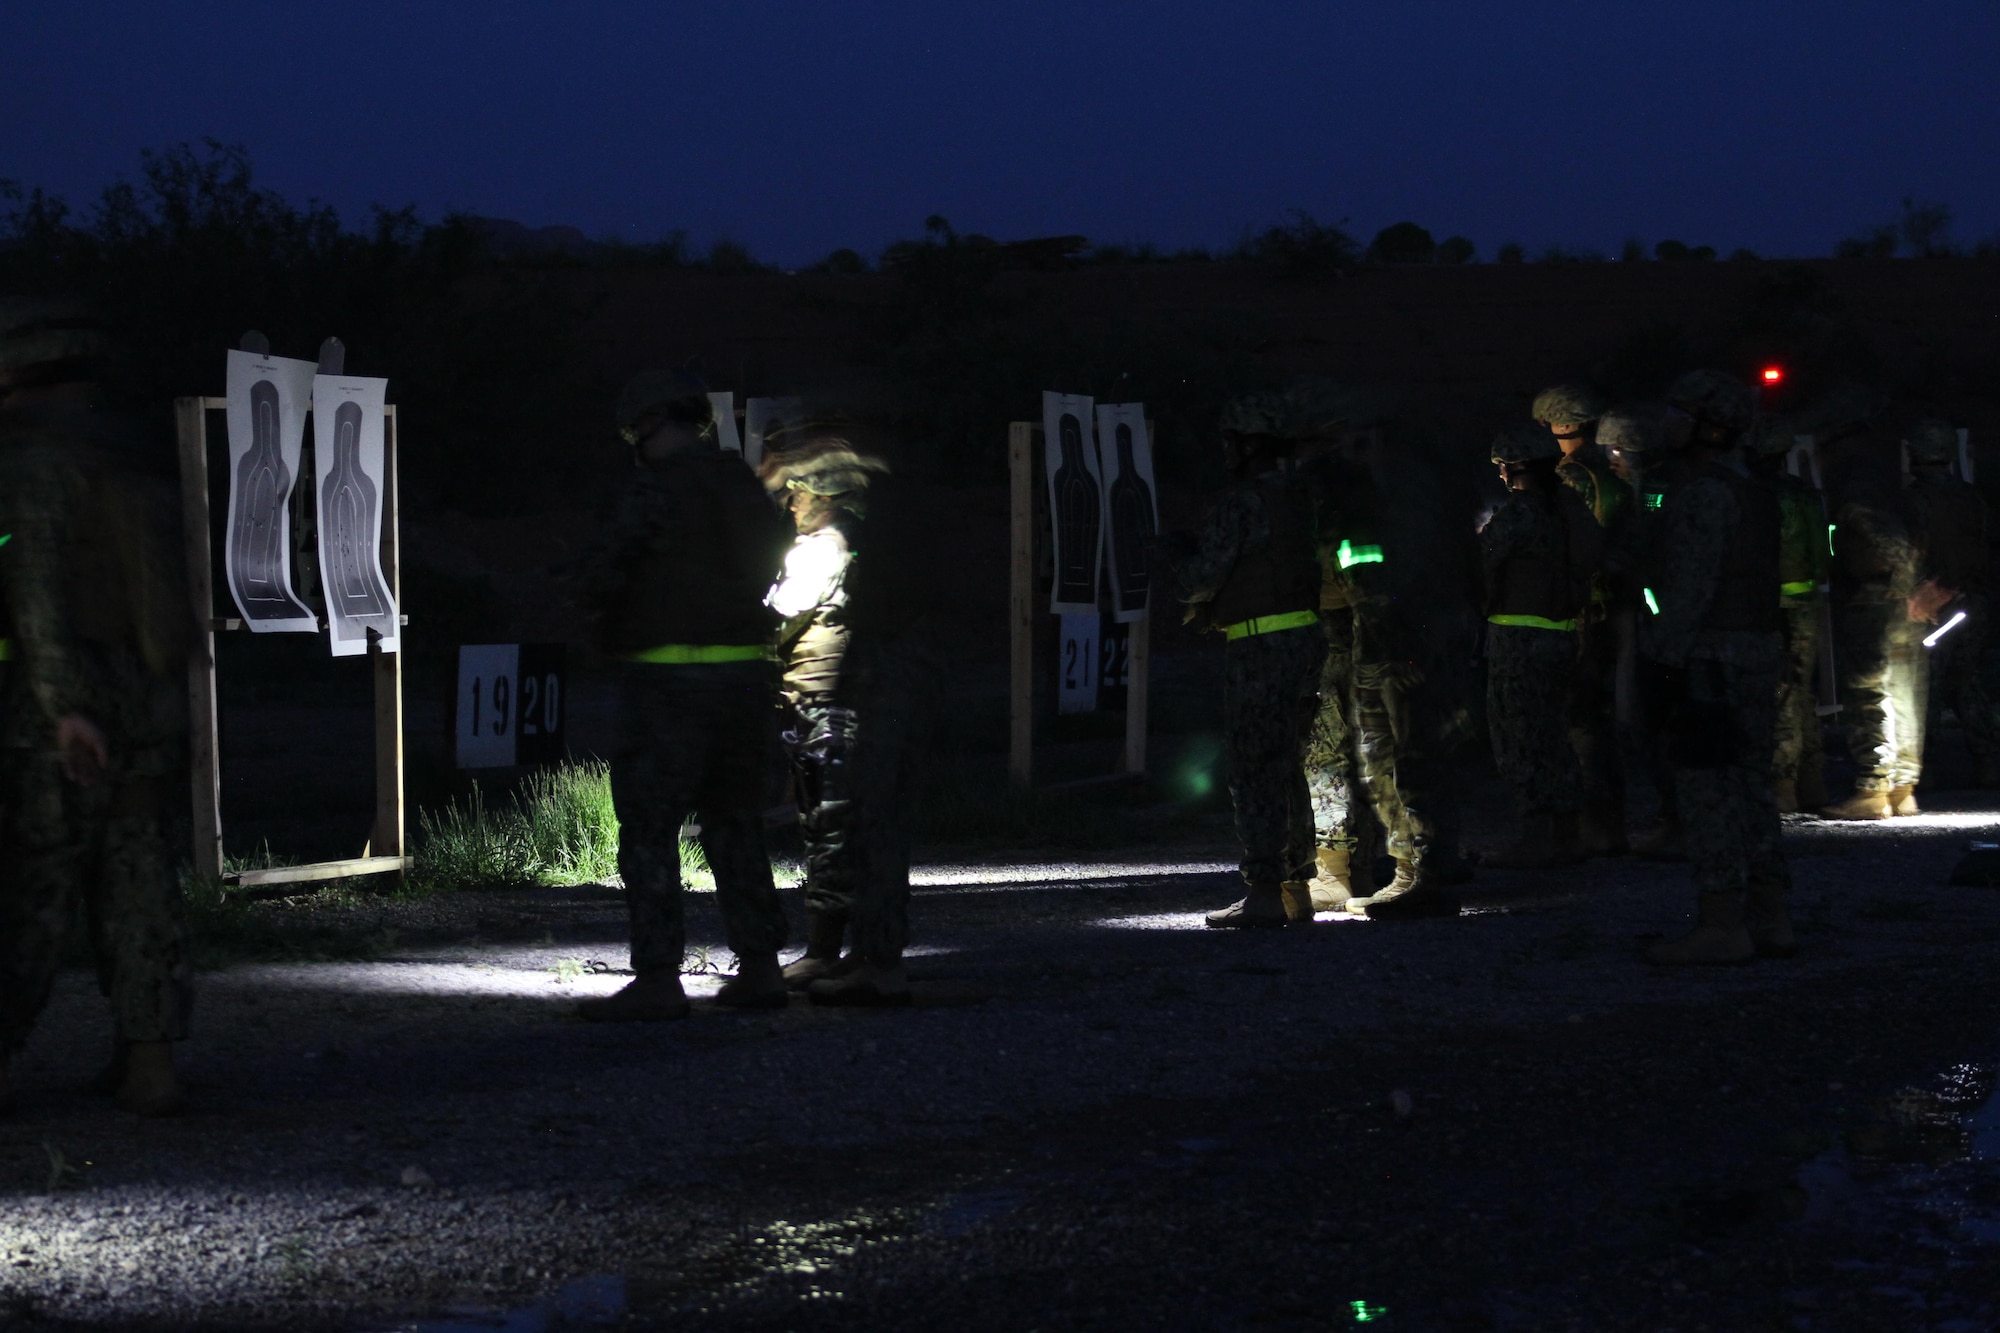 U.S. Navy students at Desert Defender, the Air Force Security Forces Center’s Ground Combat Readiness Training Center at Fort Bliss, Texas, conduct night fire training.